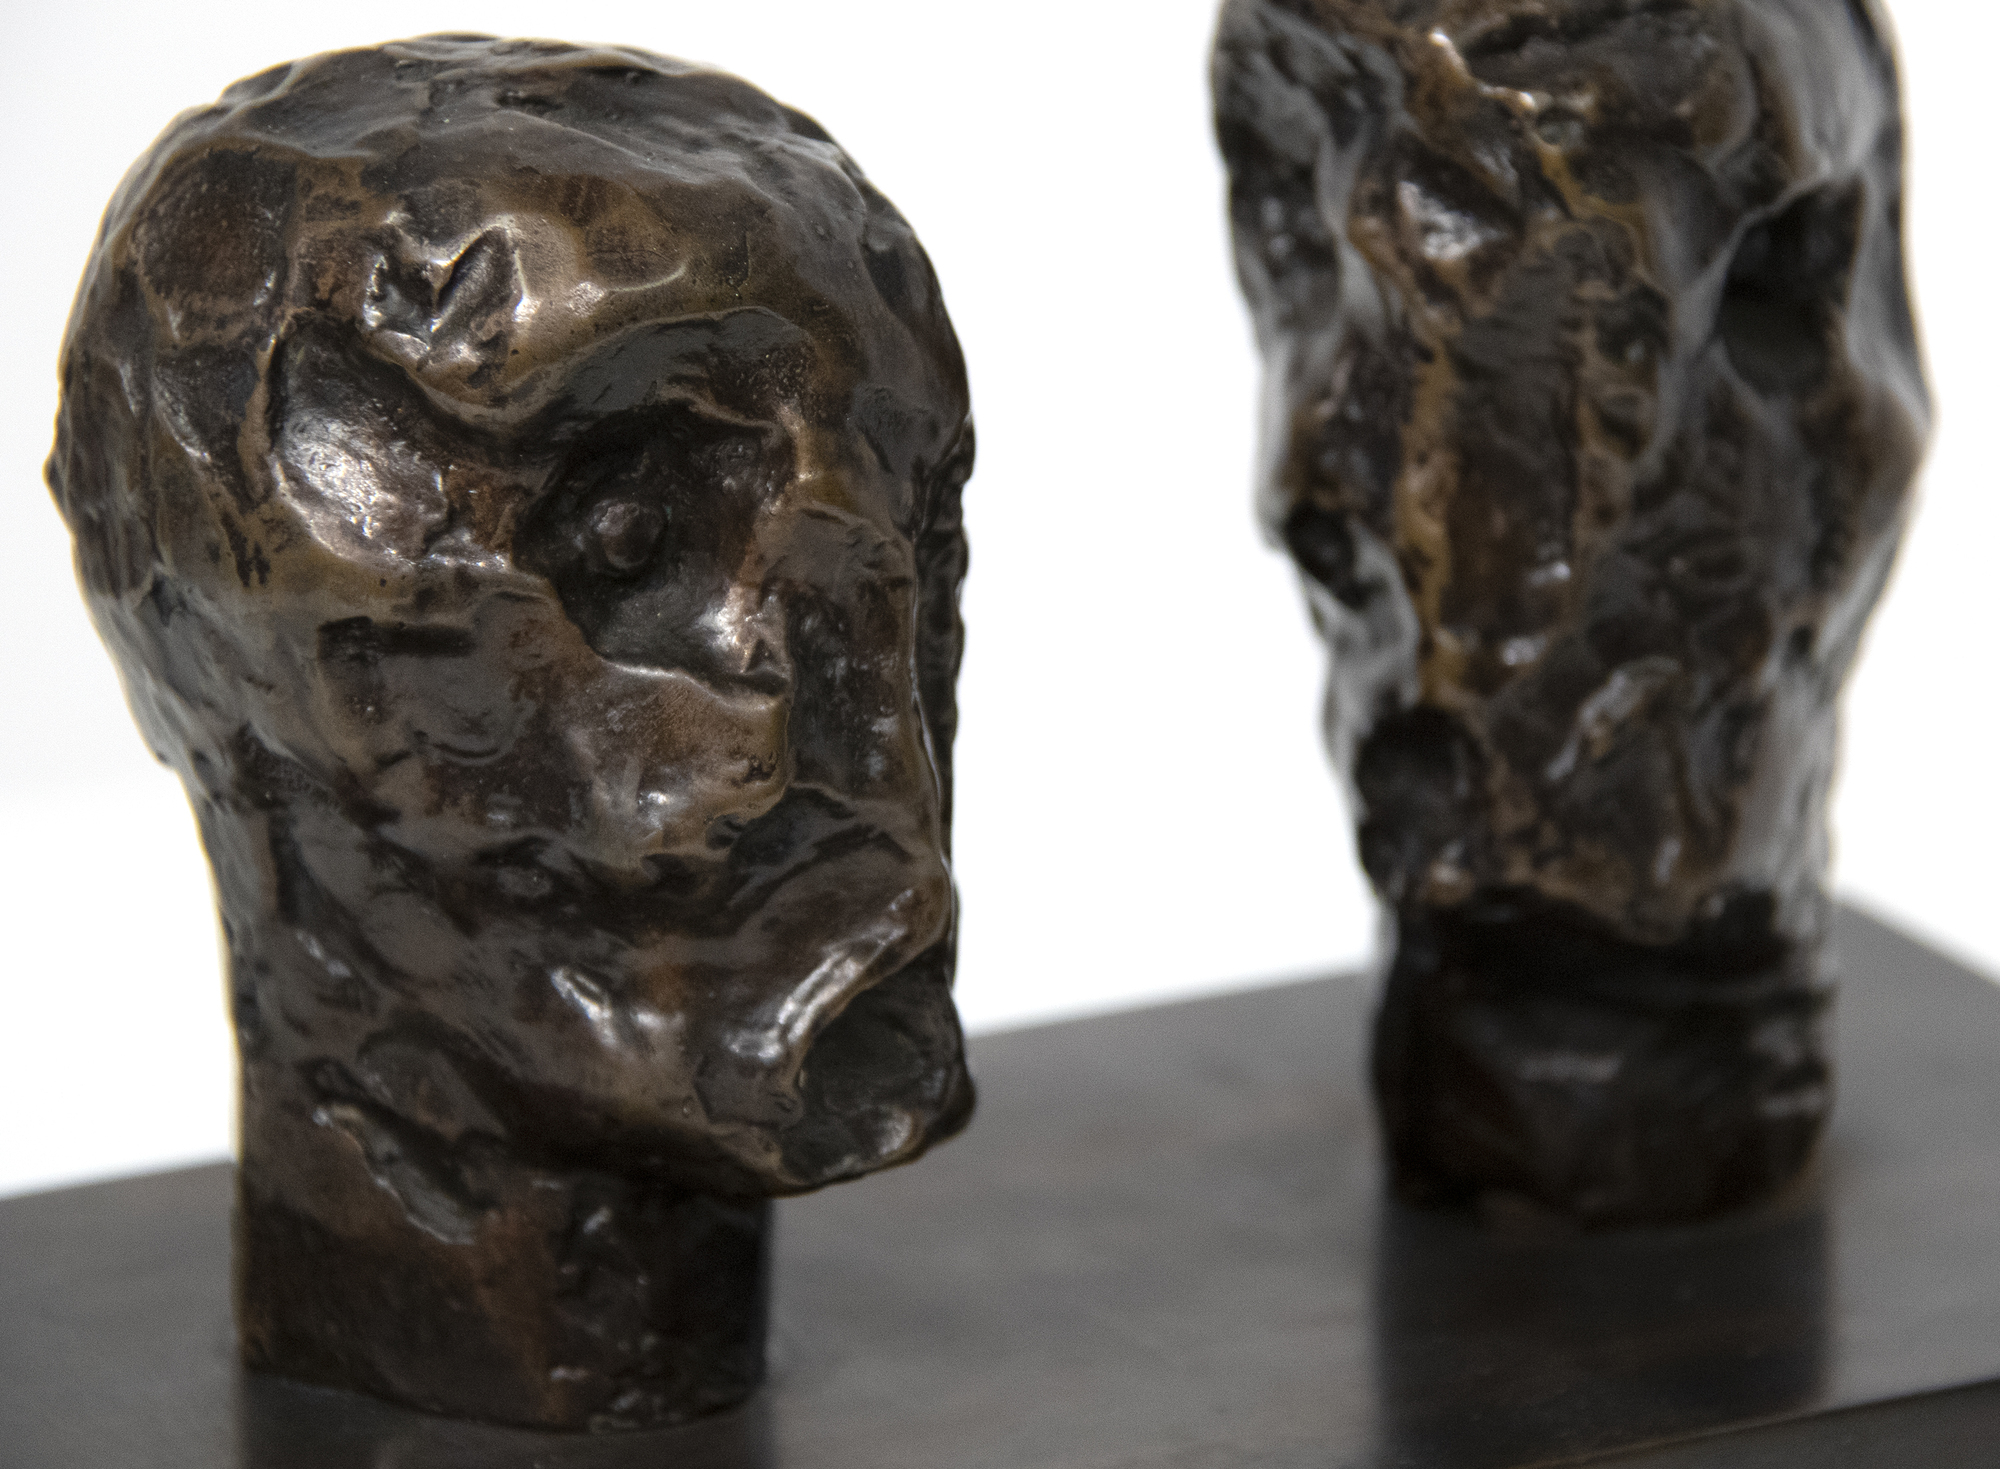 HENRY MOORE - Emperor&#039;s Heads - Bronze with brown patina - 6 3/4 x 8 1/4 x 4 1/2 in.